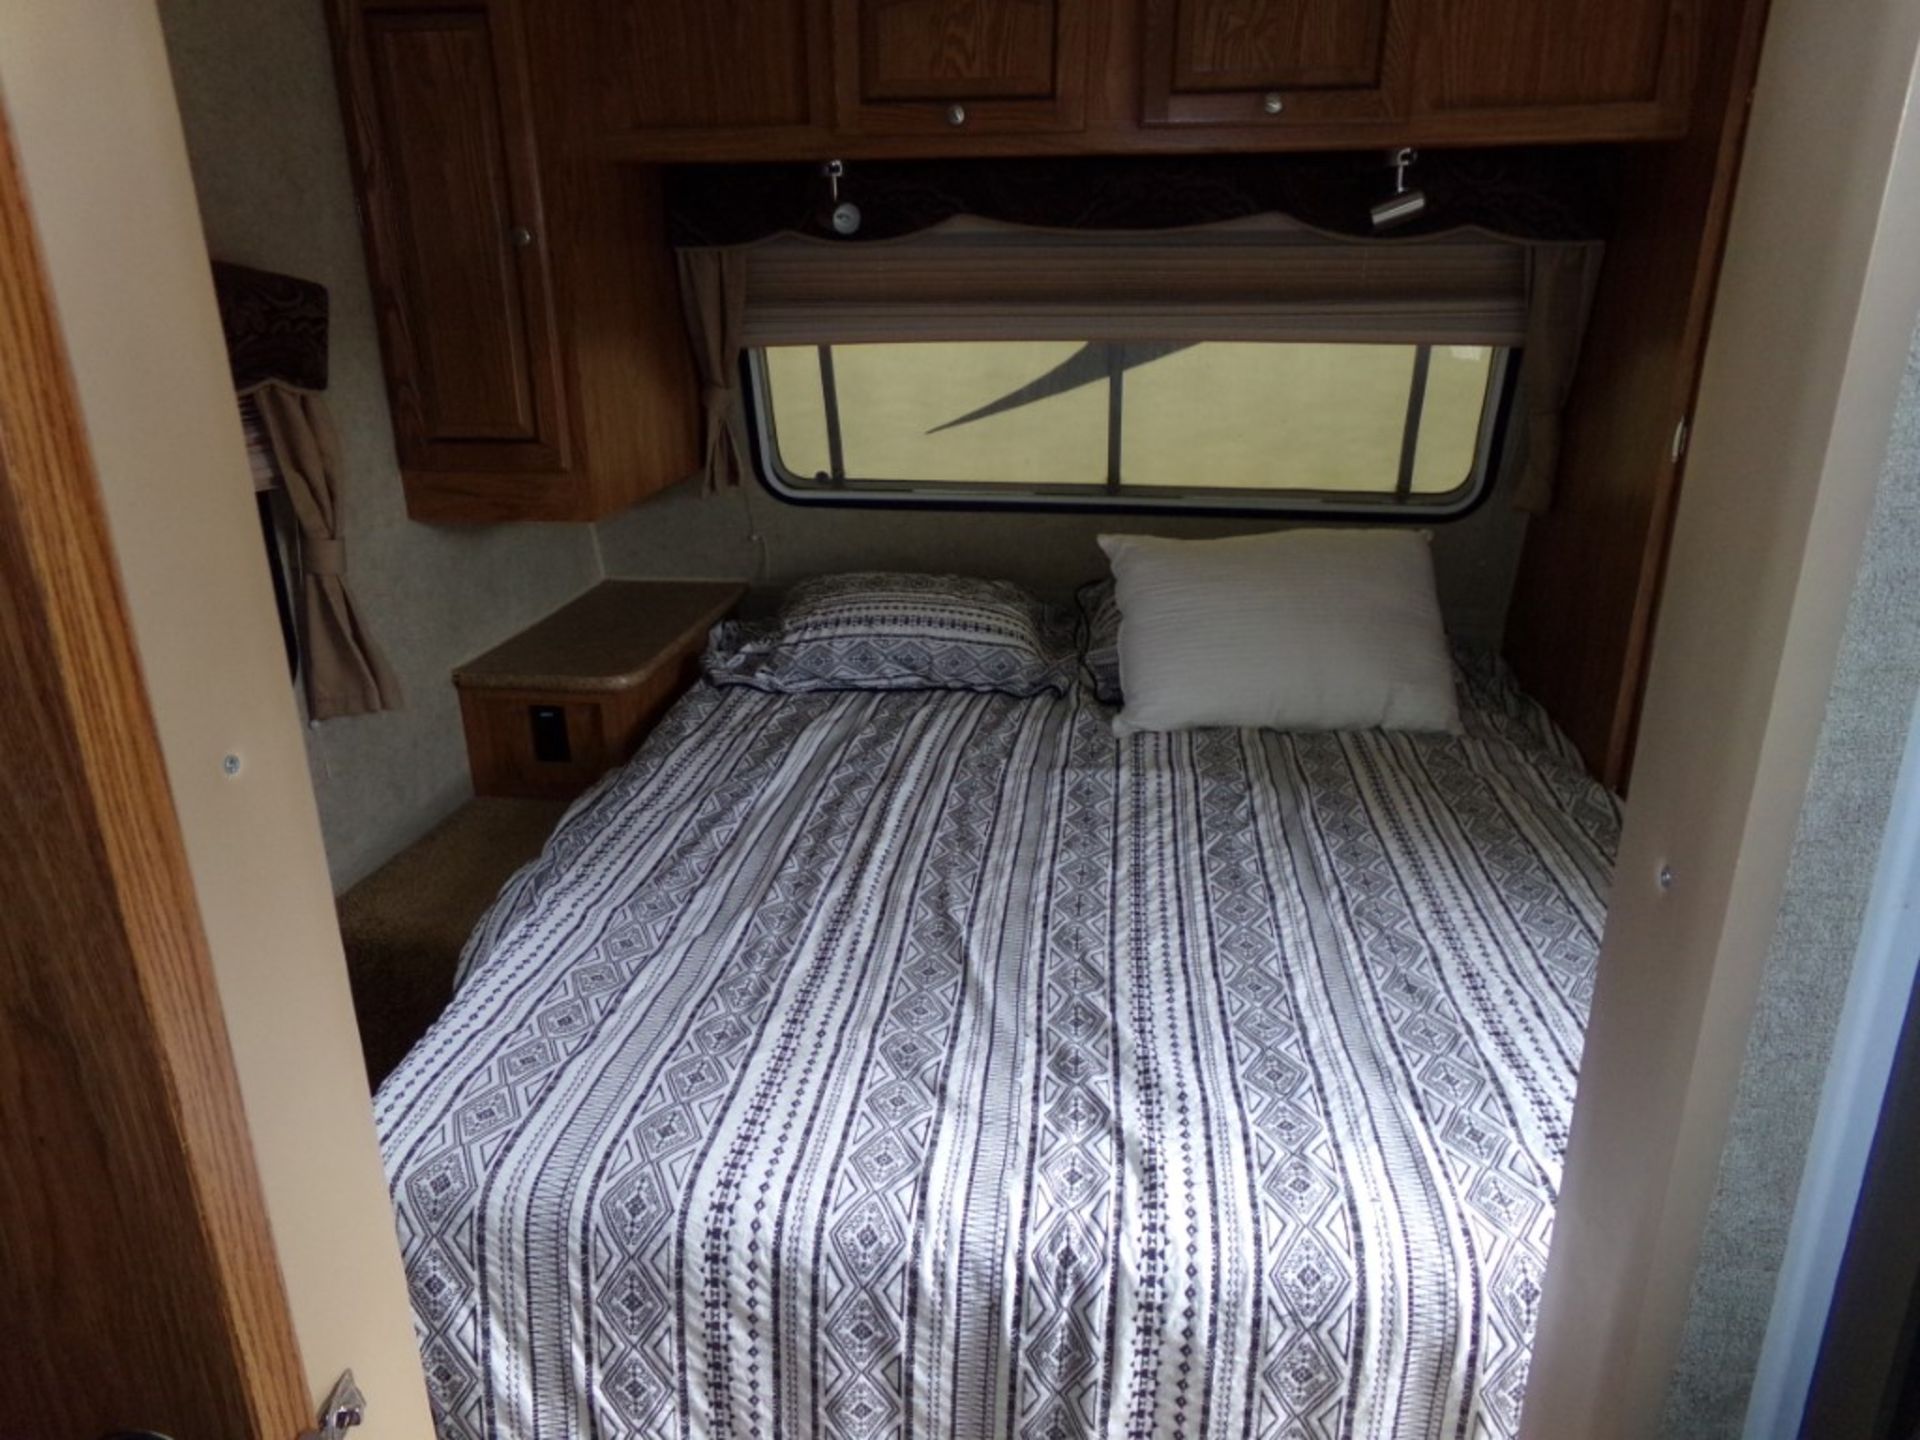 2013 Forest River Rockway Ultra Lite Camper, Approx 28', (1) Big Slide-Out, Approx. 12' Wide, - Image 7 of 7